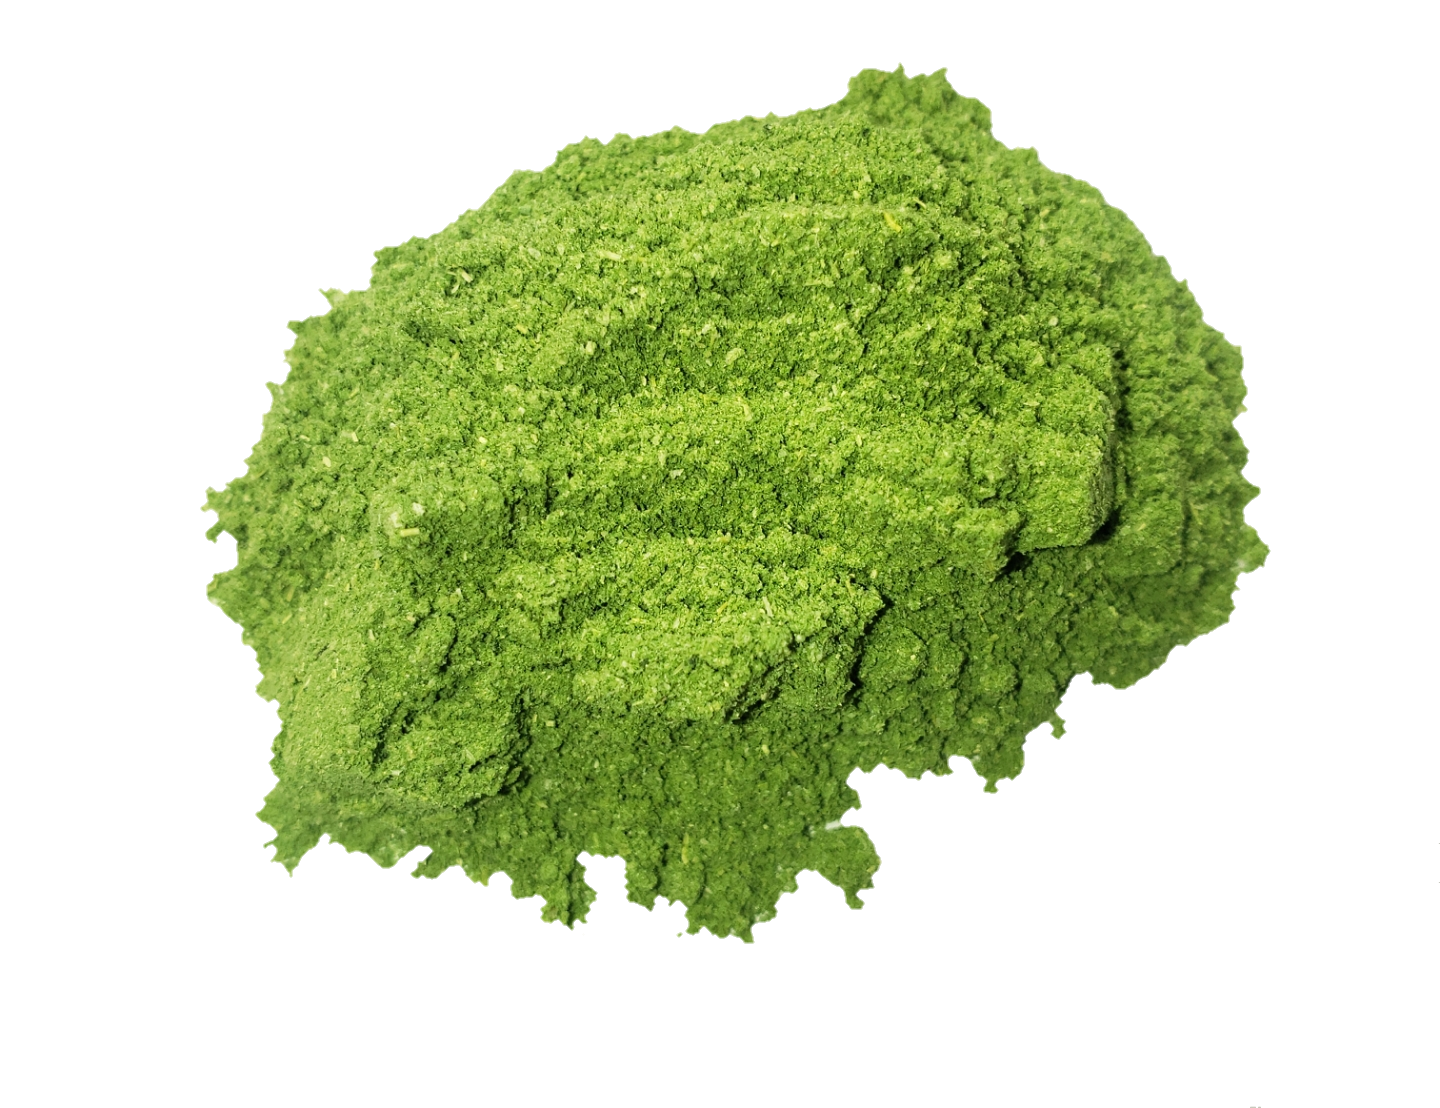 North America's Source for Very High Quality & Reasonably Priced Vegetable Powders!